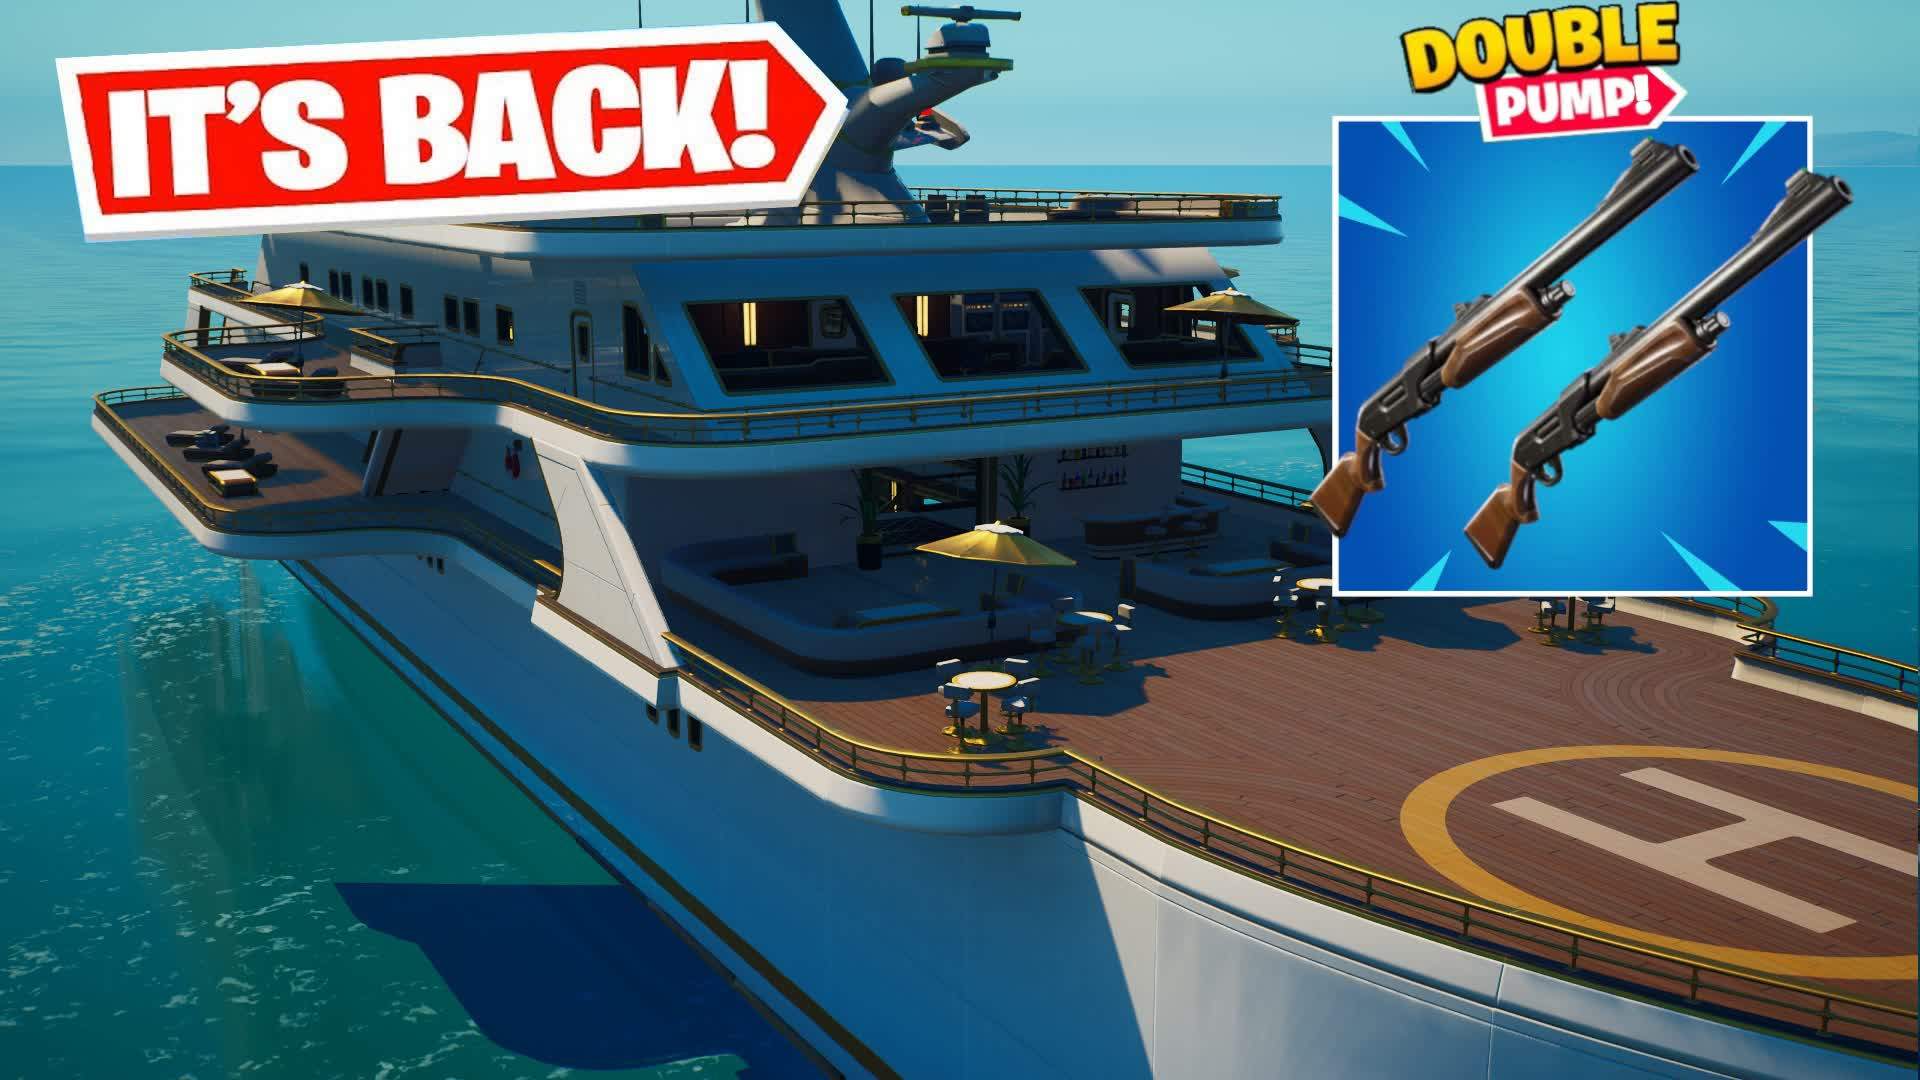 The Yacht - Double Pump